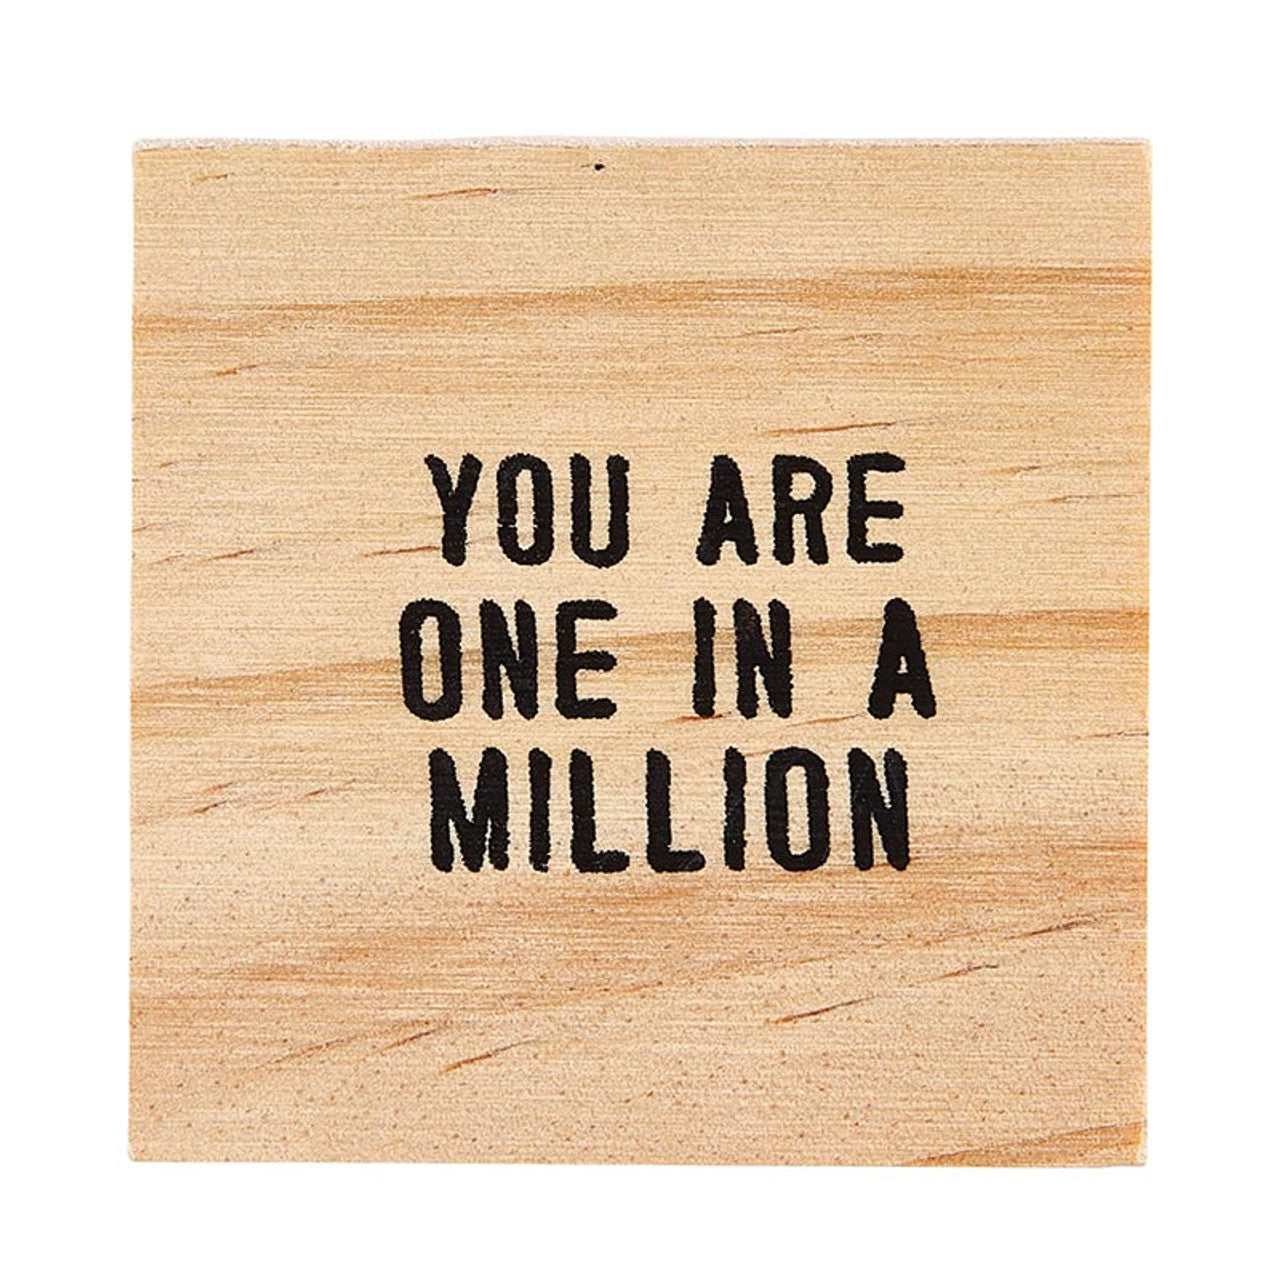 You Are One in a Million Treasure Box Earrings | In a Wooden Gift Box